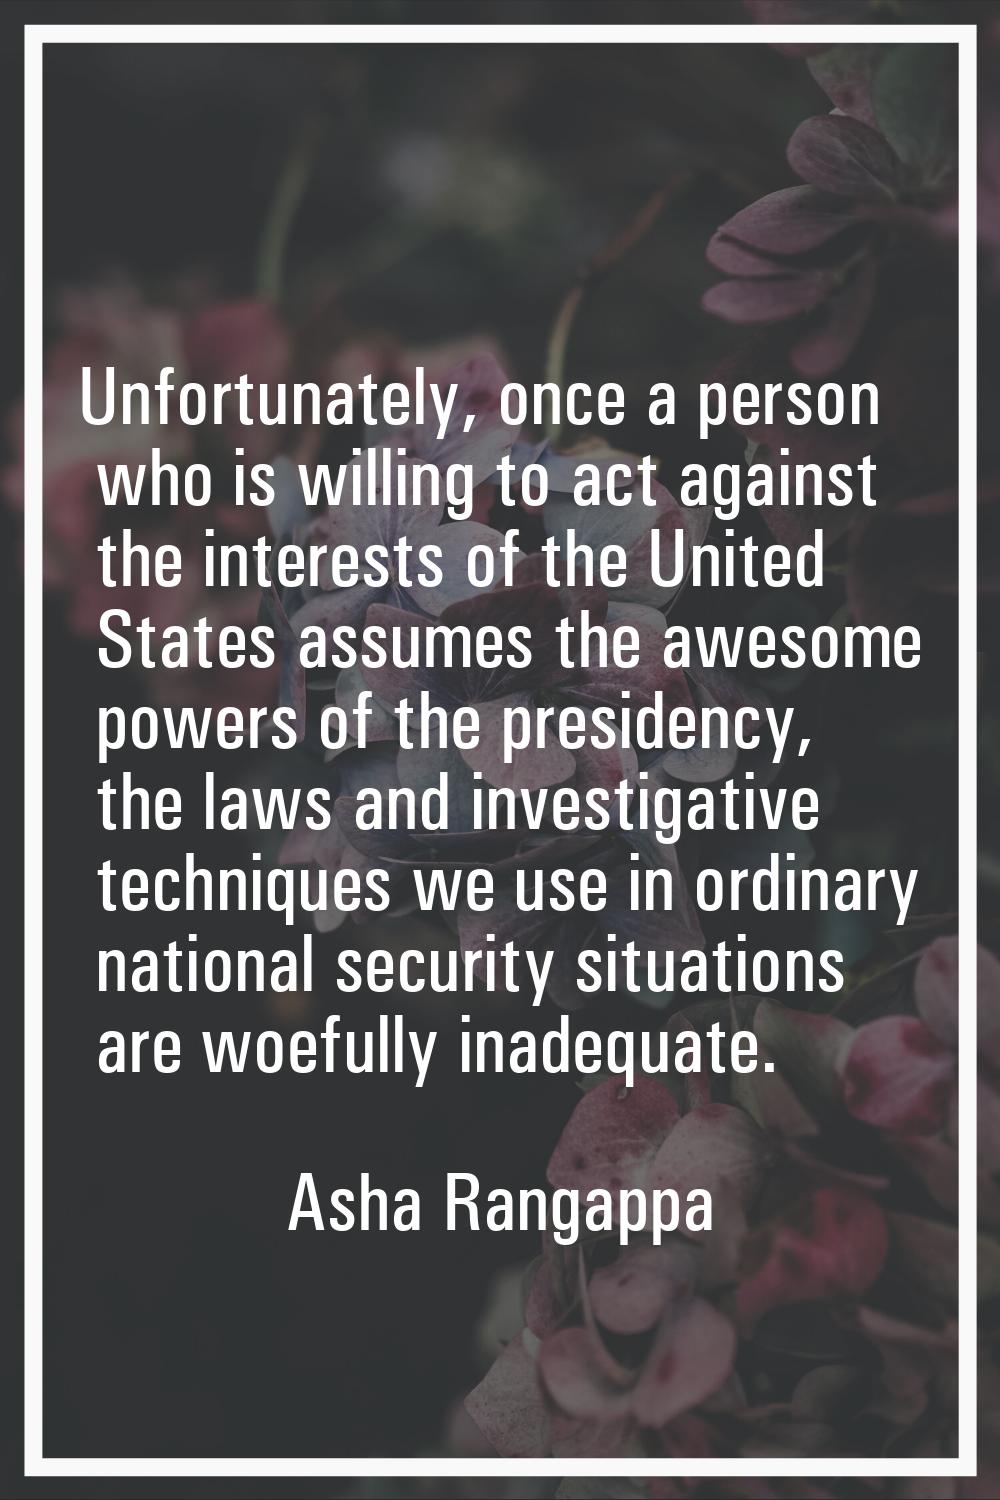 Unfortunately, once a person who is willing to act against the interests of the United States assum